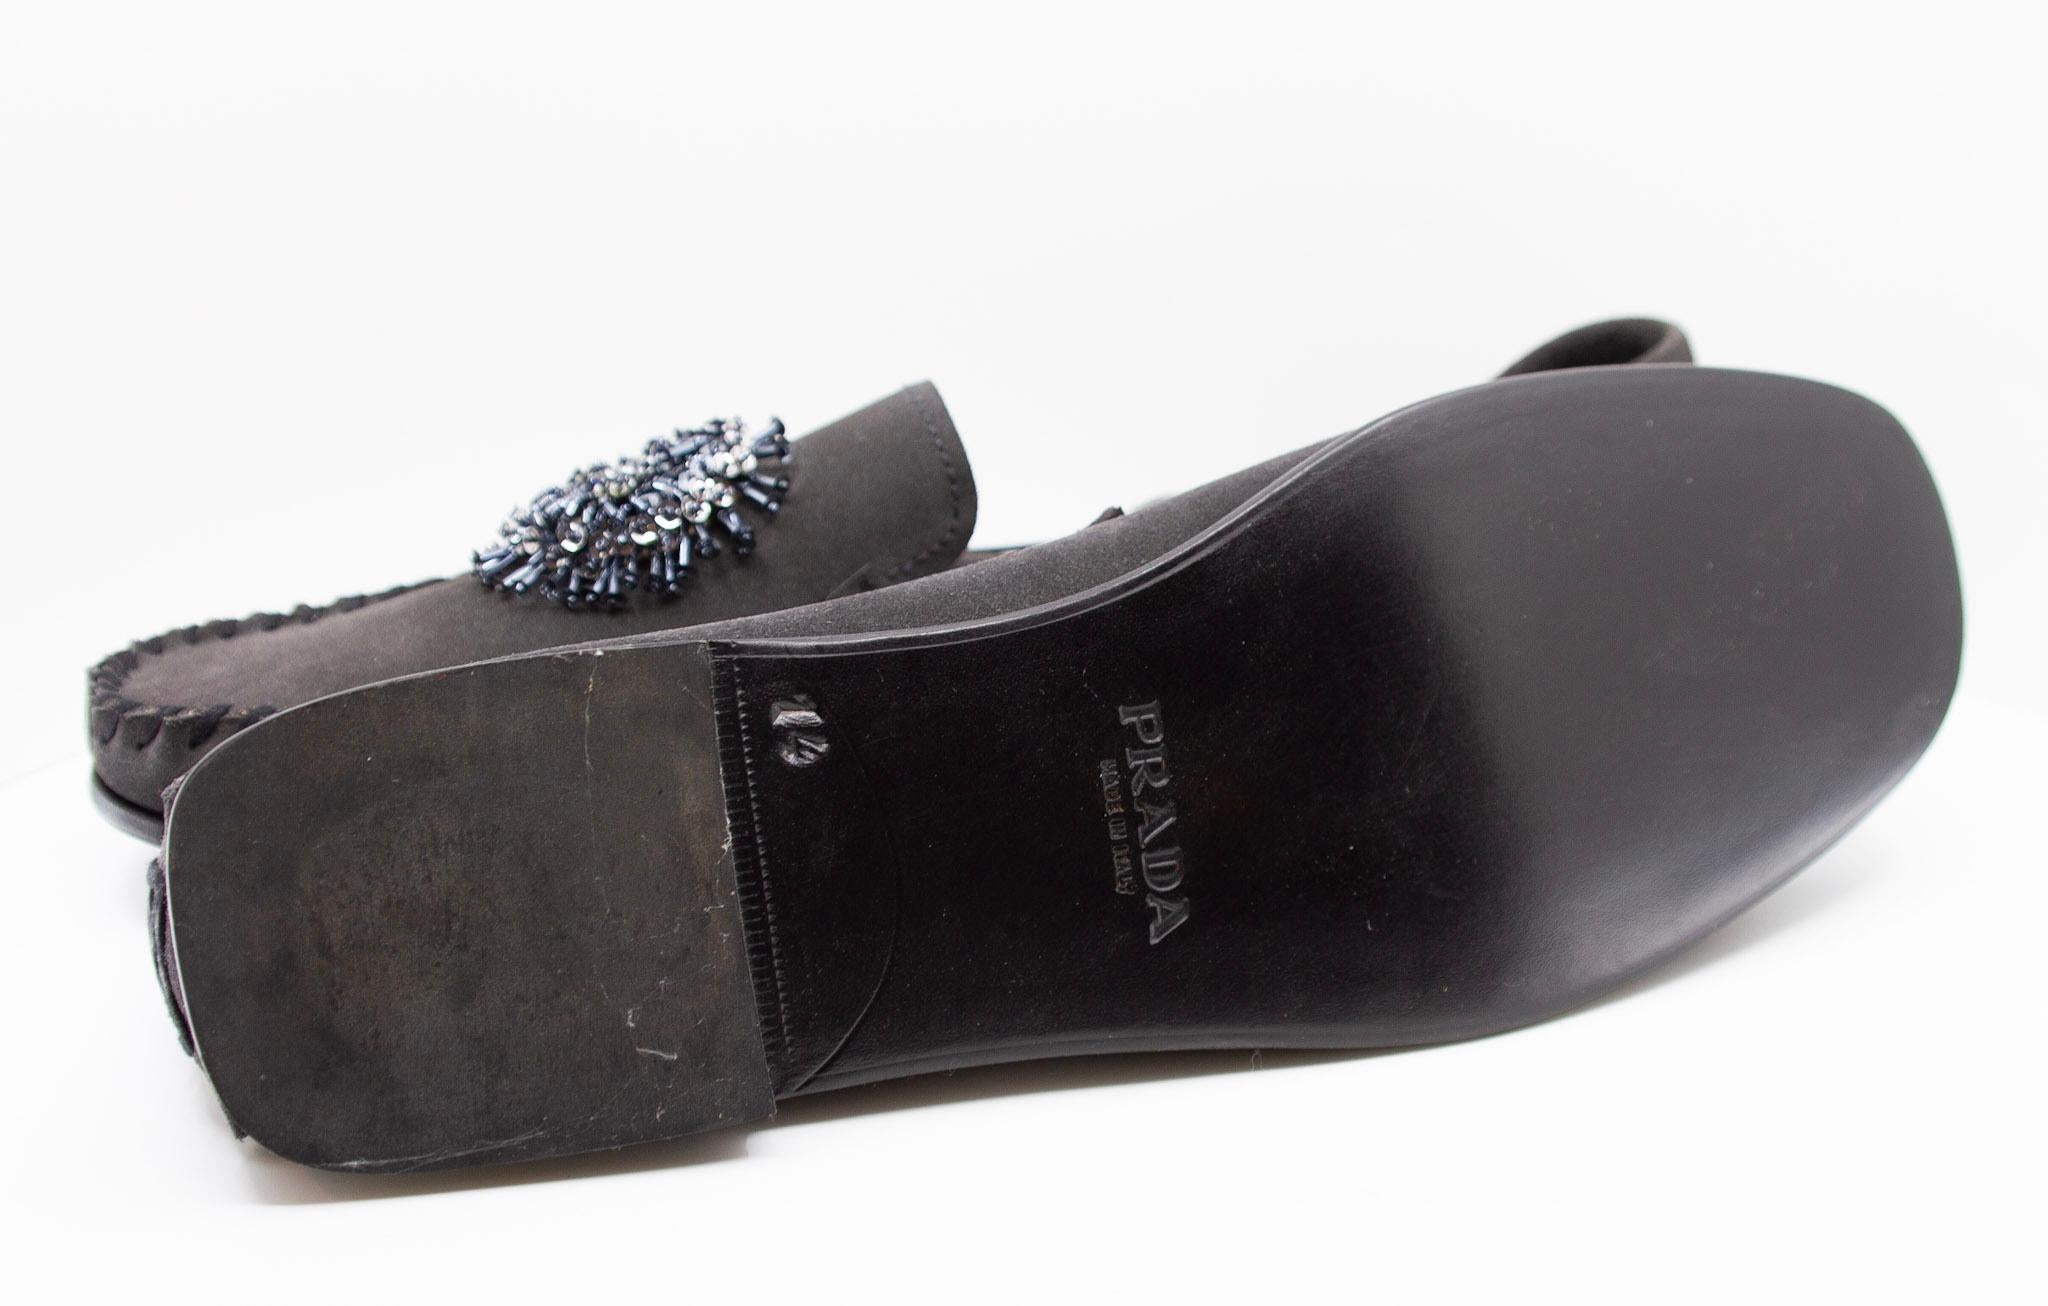 Prada Charcoal Suede Loafers with Beaded Embellishments and Leather Soles For Sale 3